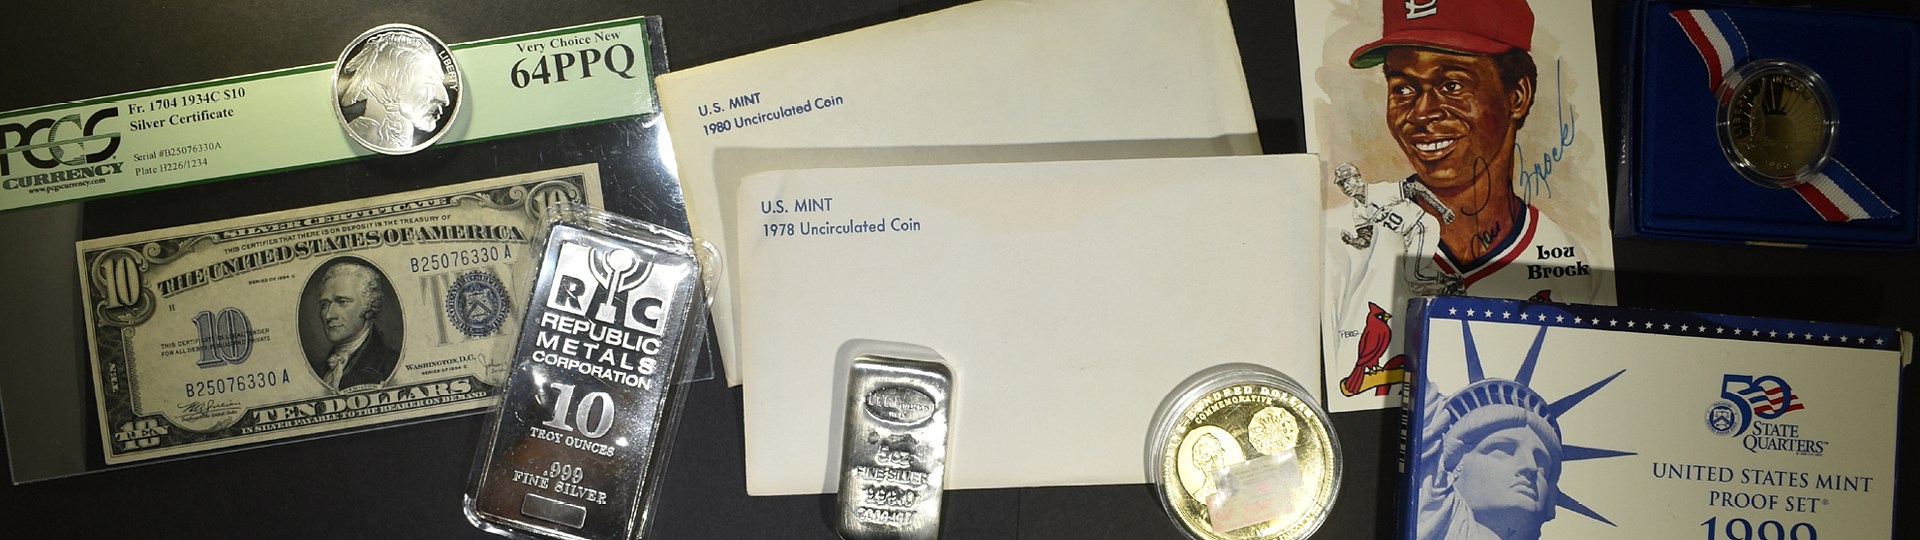 August 25th Silver City Rare Coin & Currency Auction by Silver City Auctions